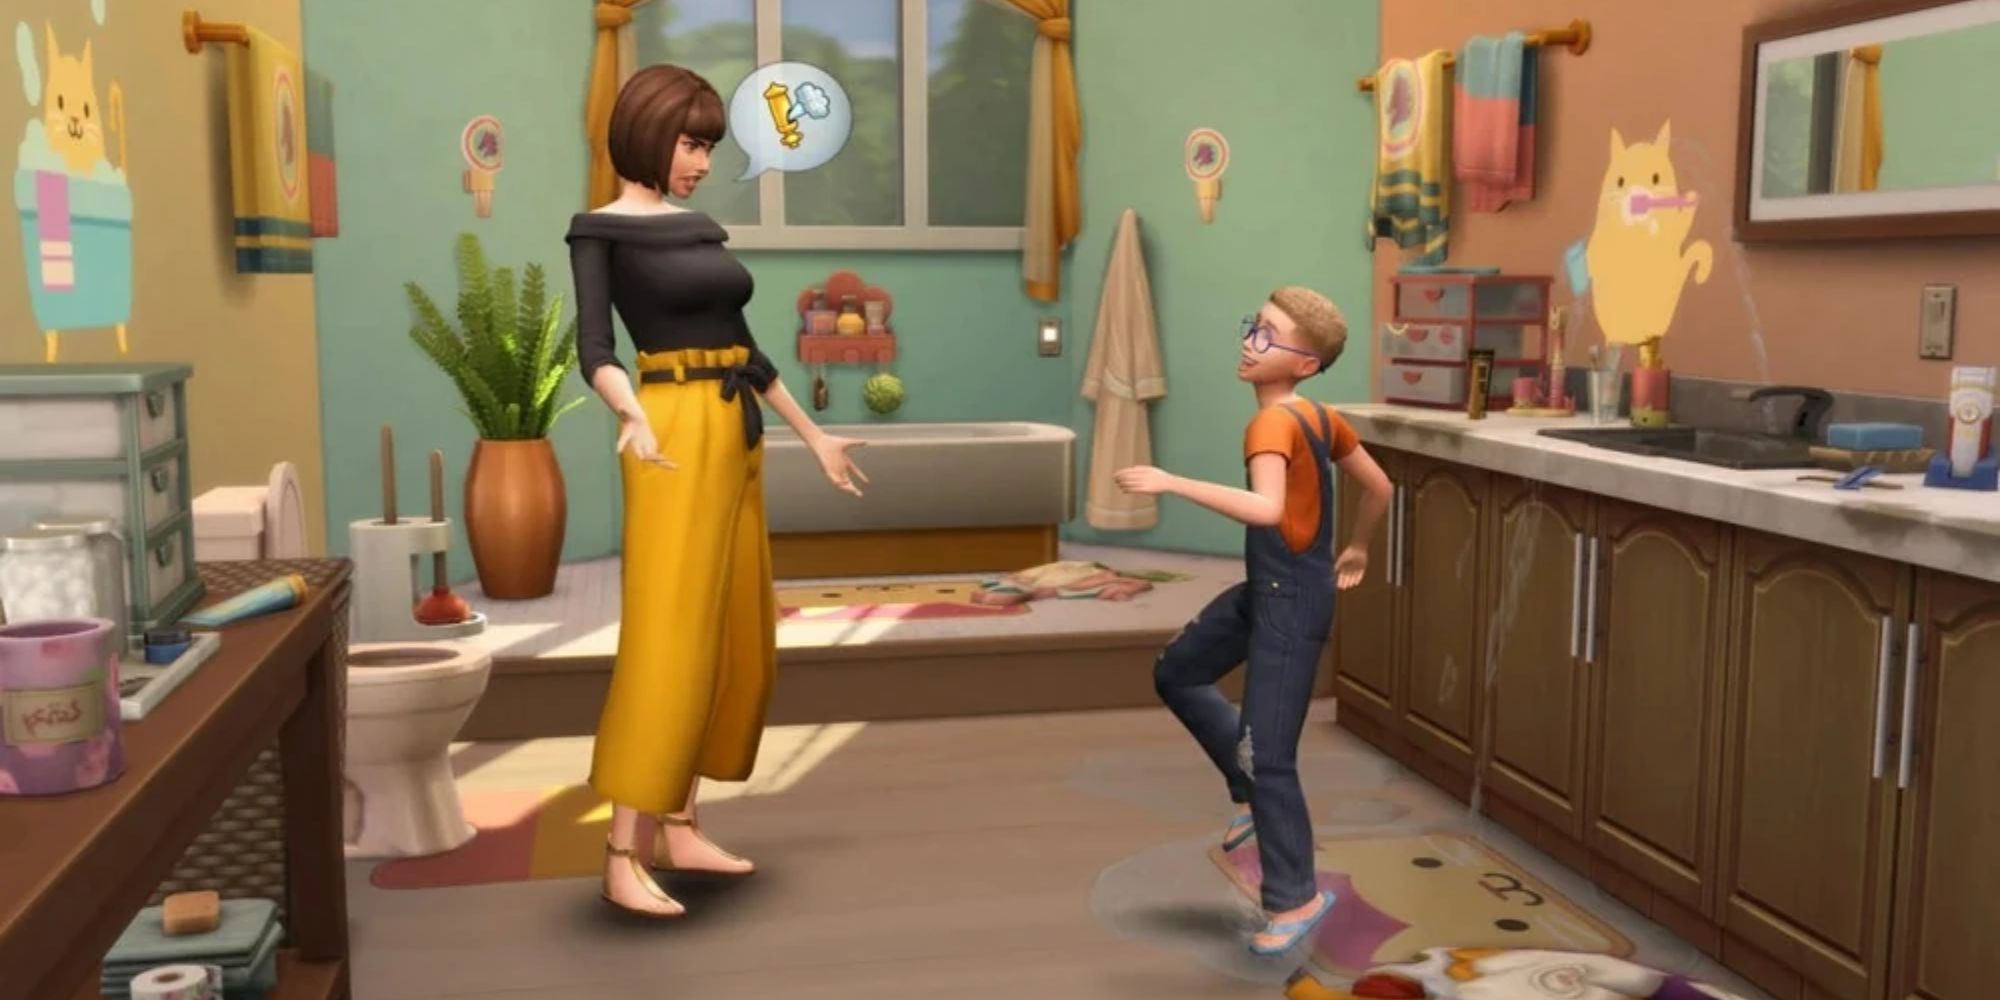 The Sims 4 Bathroom Clutter Kit: A mother speaks to her child in a bathroom decorated with wall decals, stains and various bathroom utensils like a shaver and toothpaste